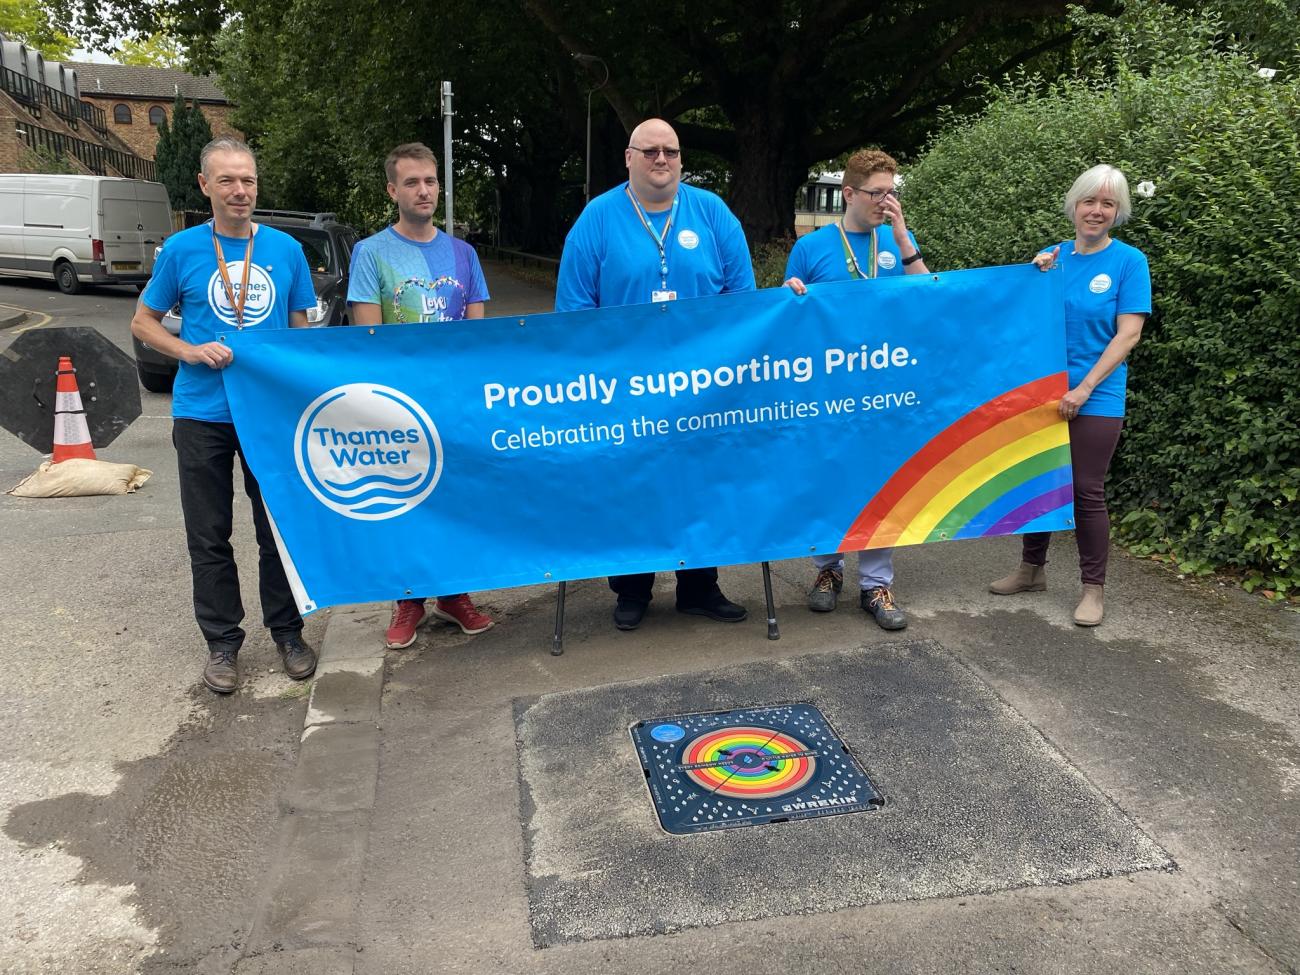 Thames Water stood with LBGTQ cover